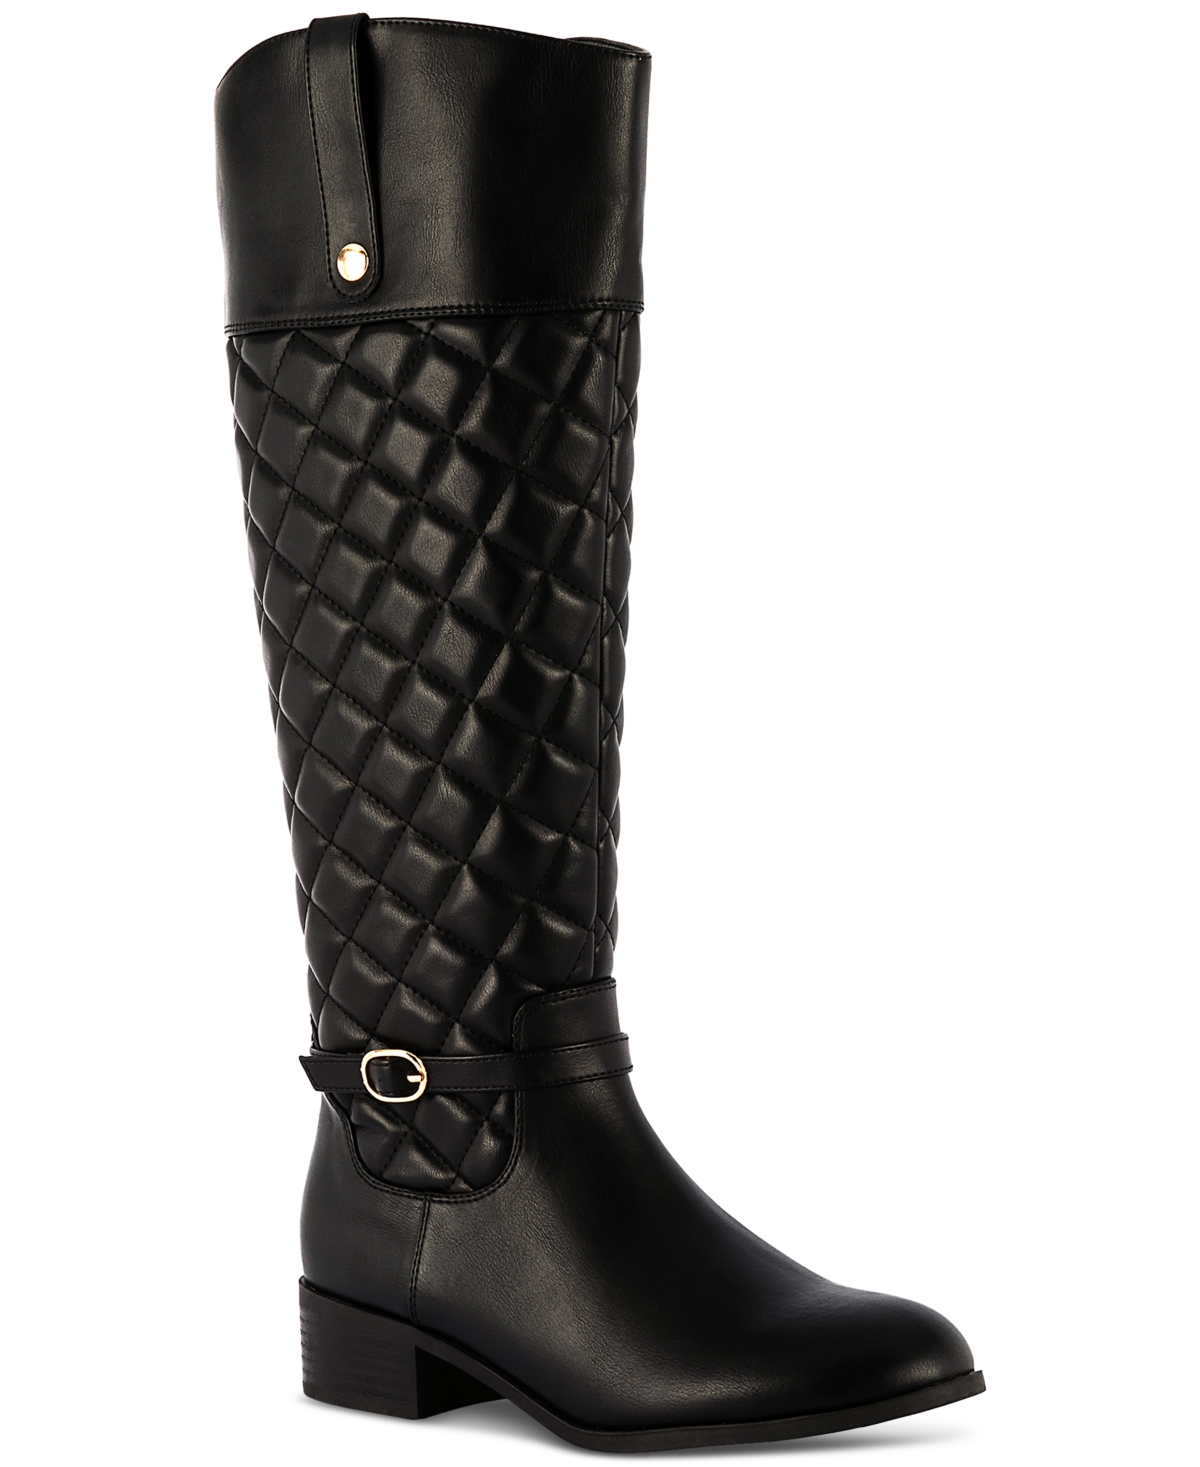 Stancee Quilted Buckled Riding Boots, Created for Macys - Chocolate Micro Smooth